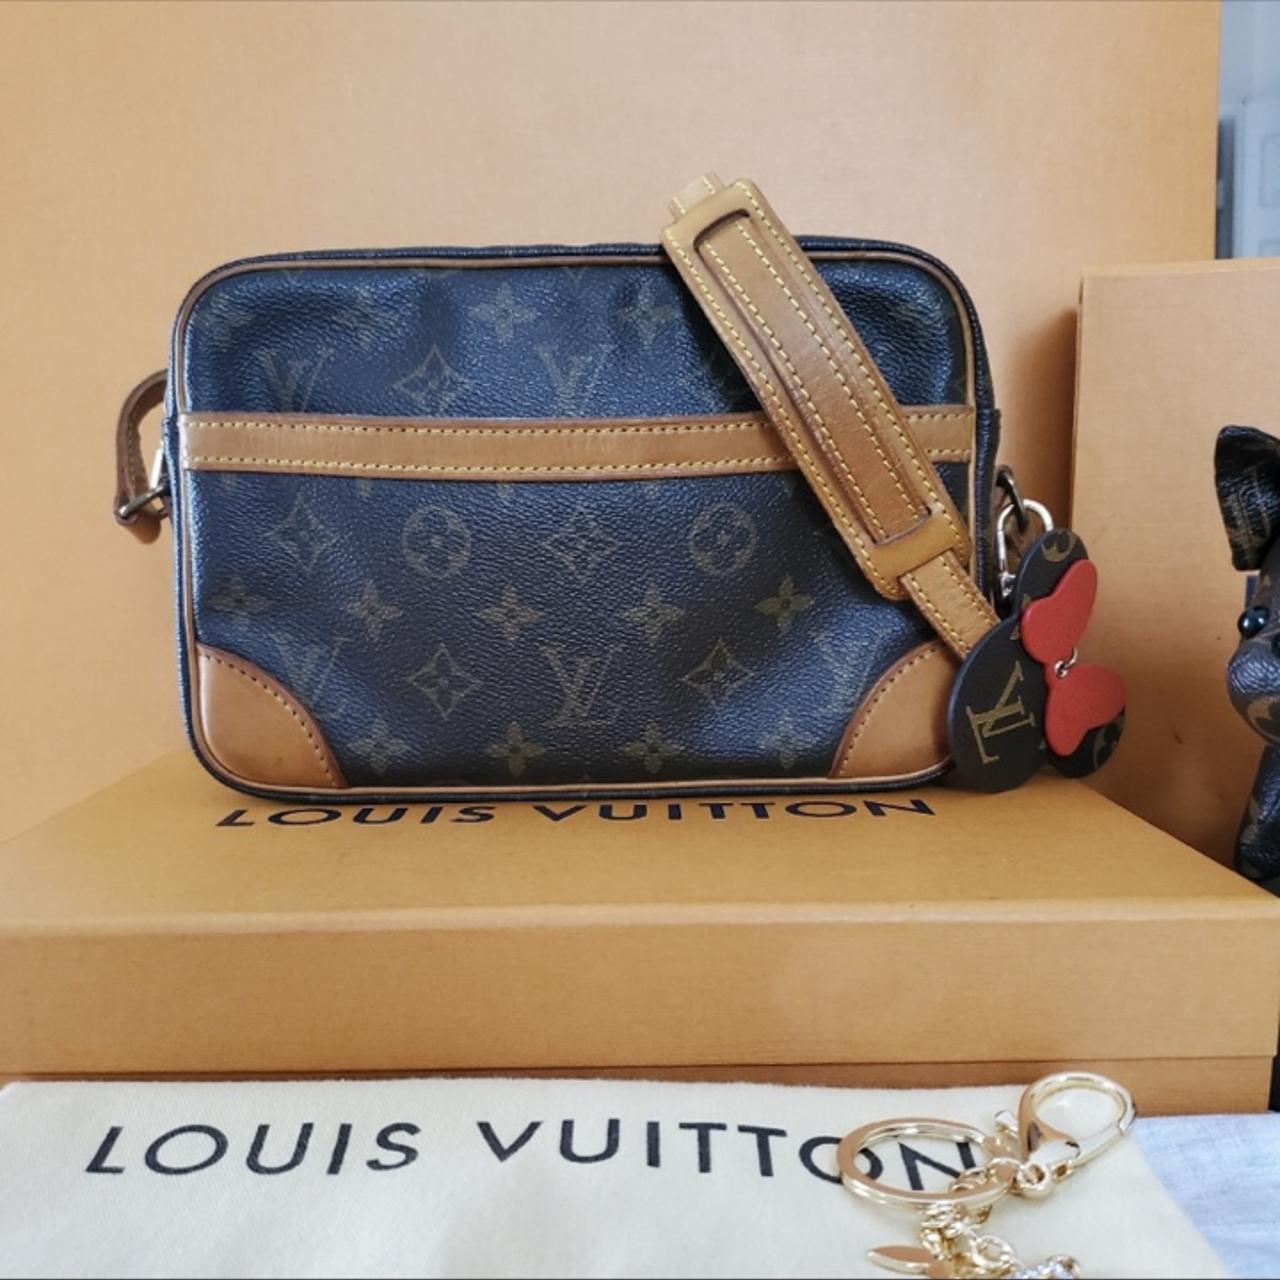 HOW TO CLEAN LOUIS VUITTON VACHETTA LEATHER ( EFFECTIVE WAY TO